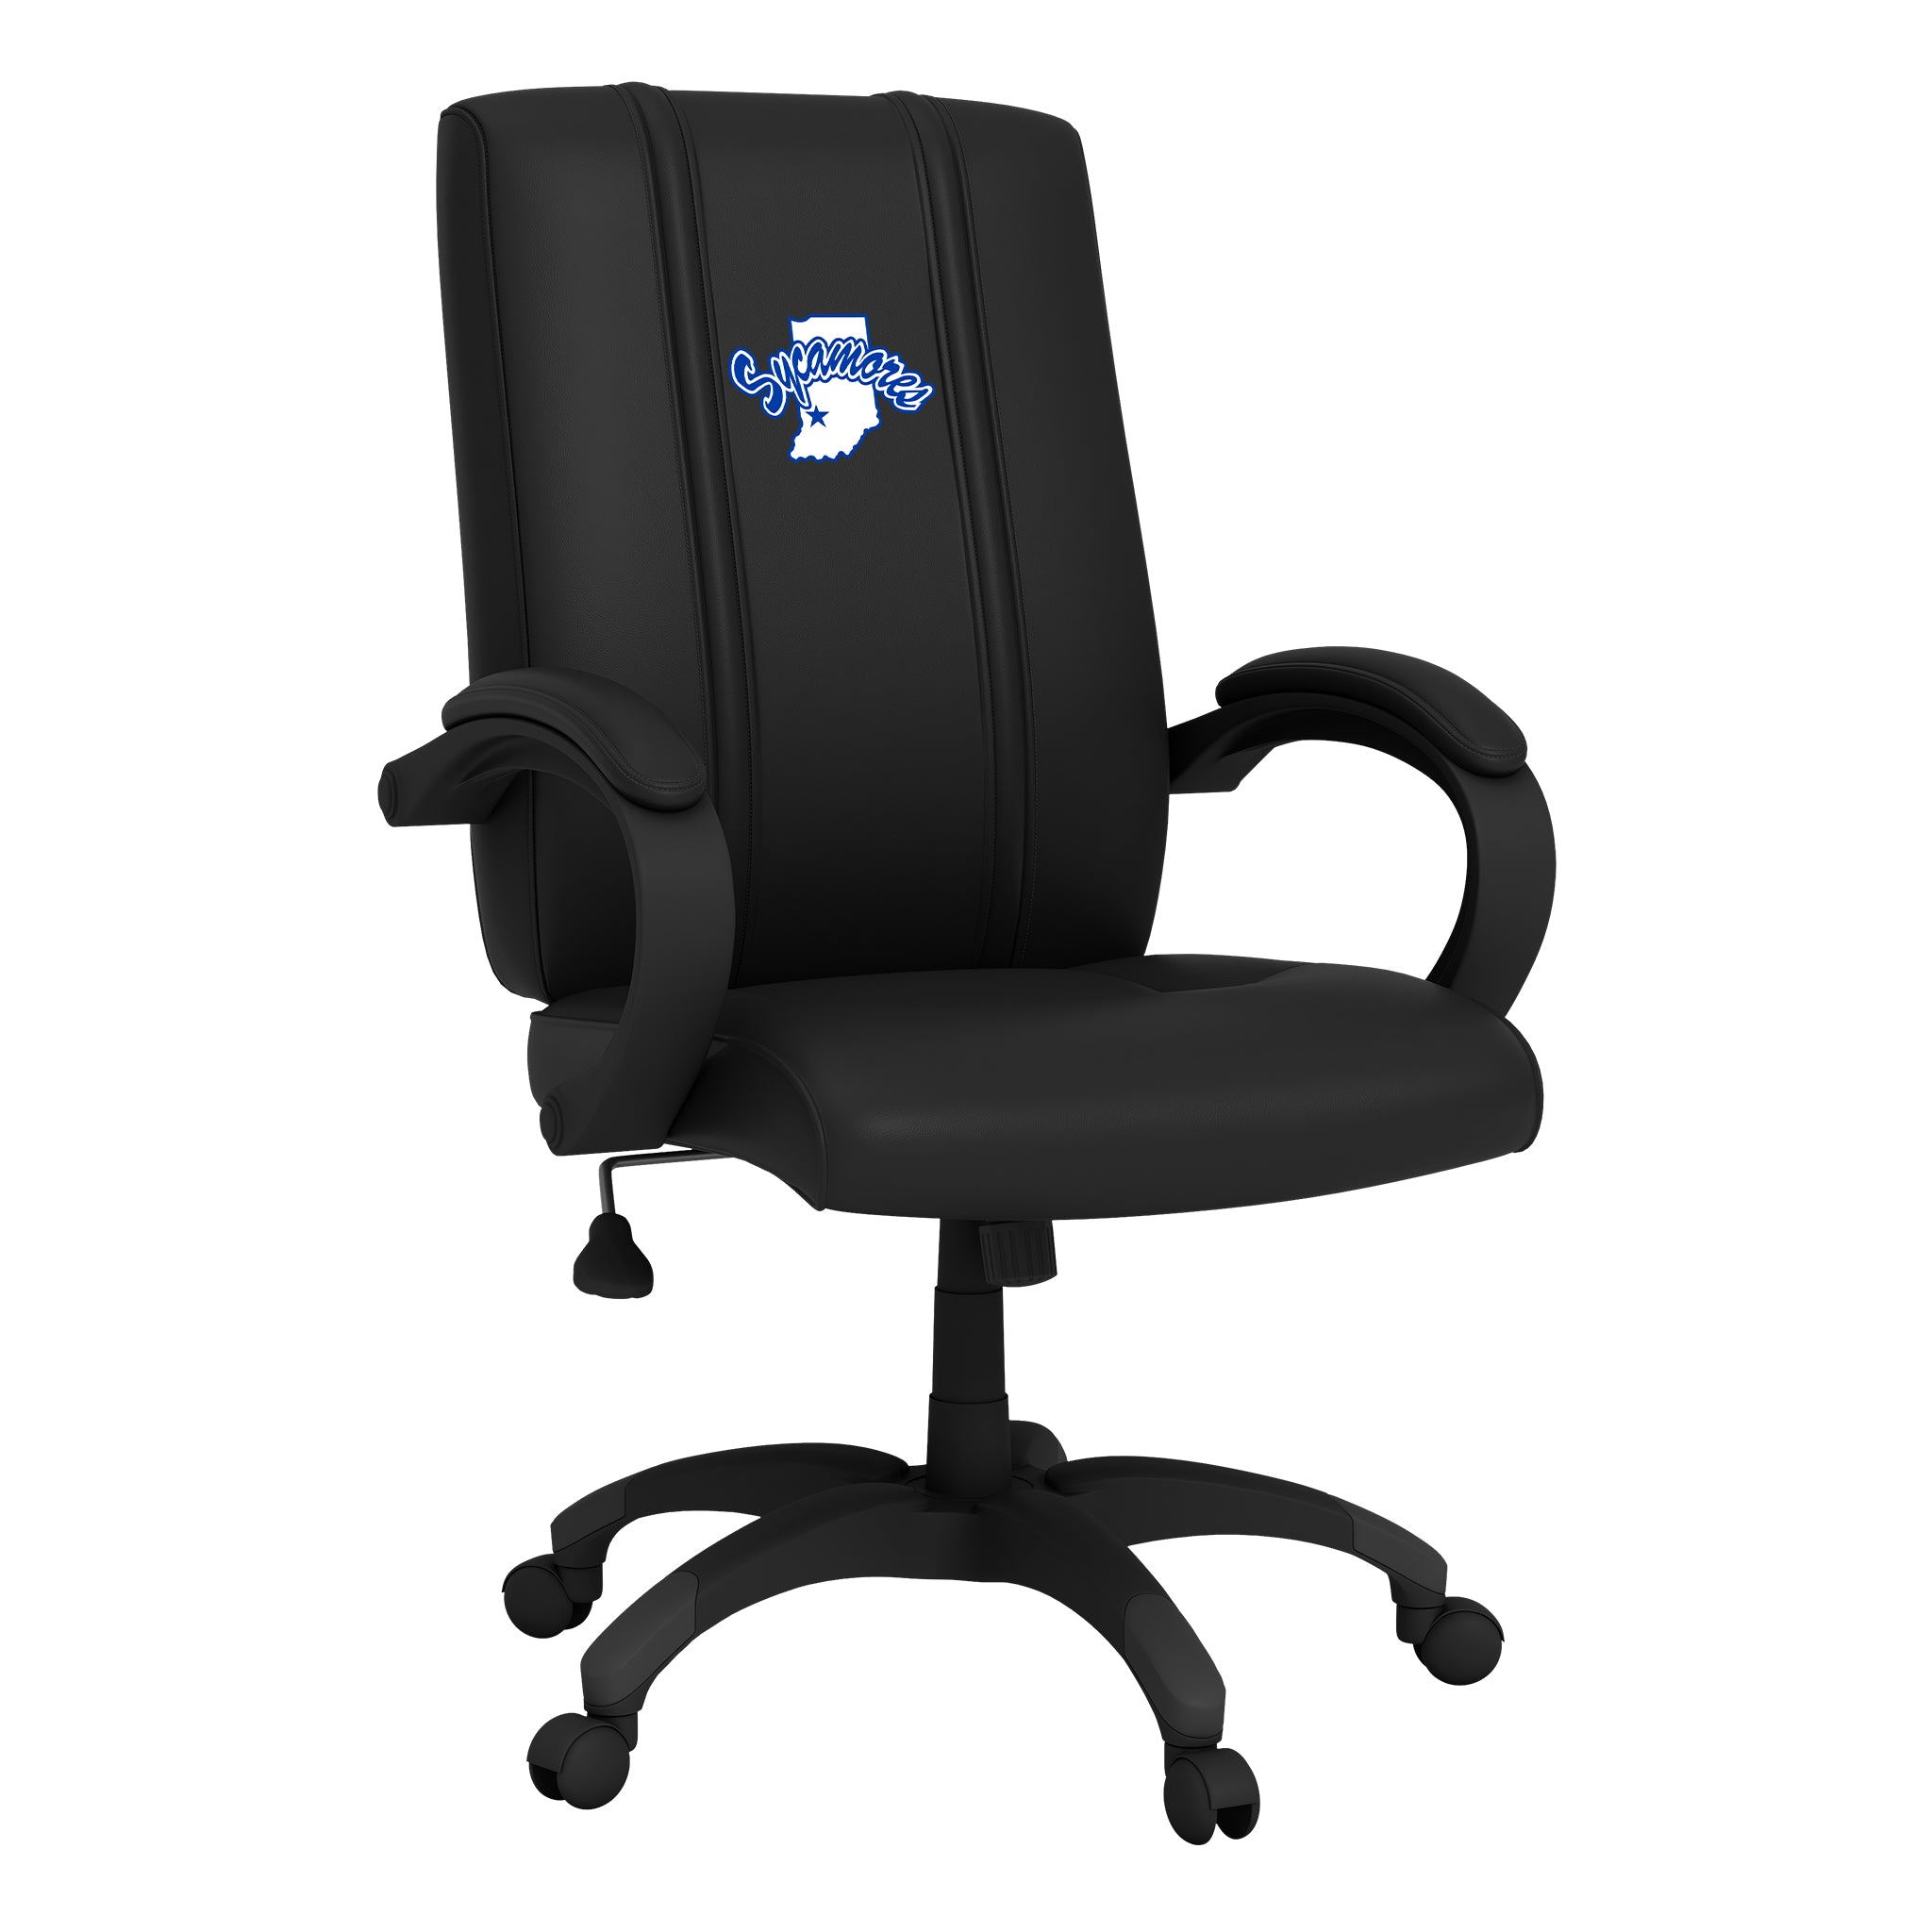 Indiana State Sycamores Office Chair 1000 with Indiana State Sycamores Logo